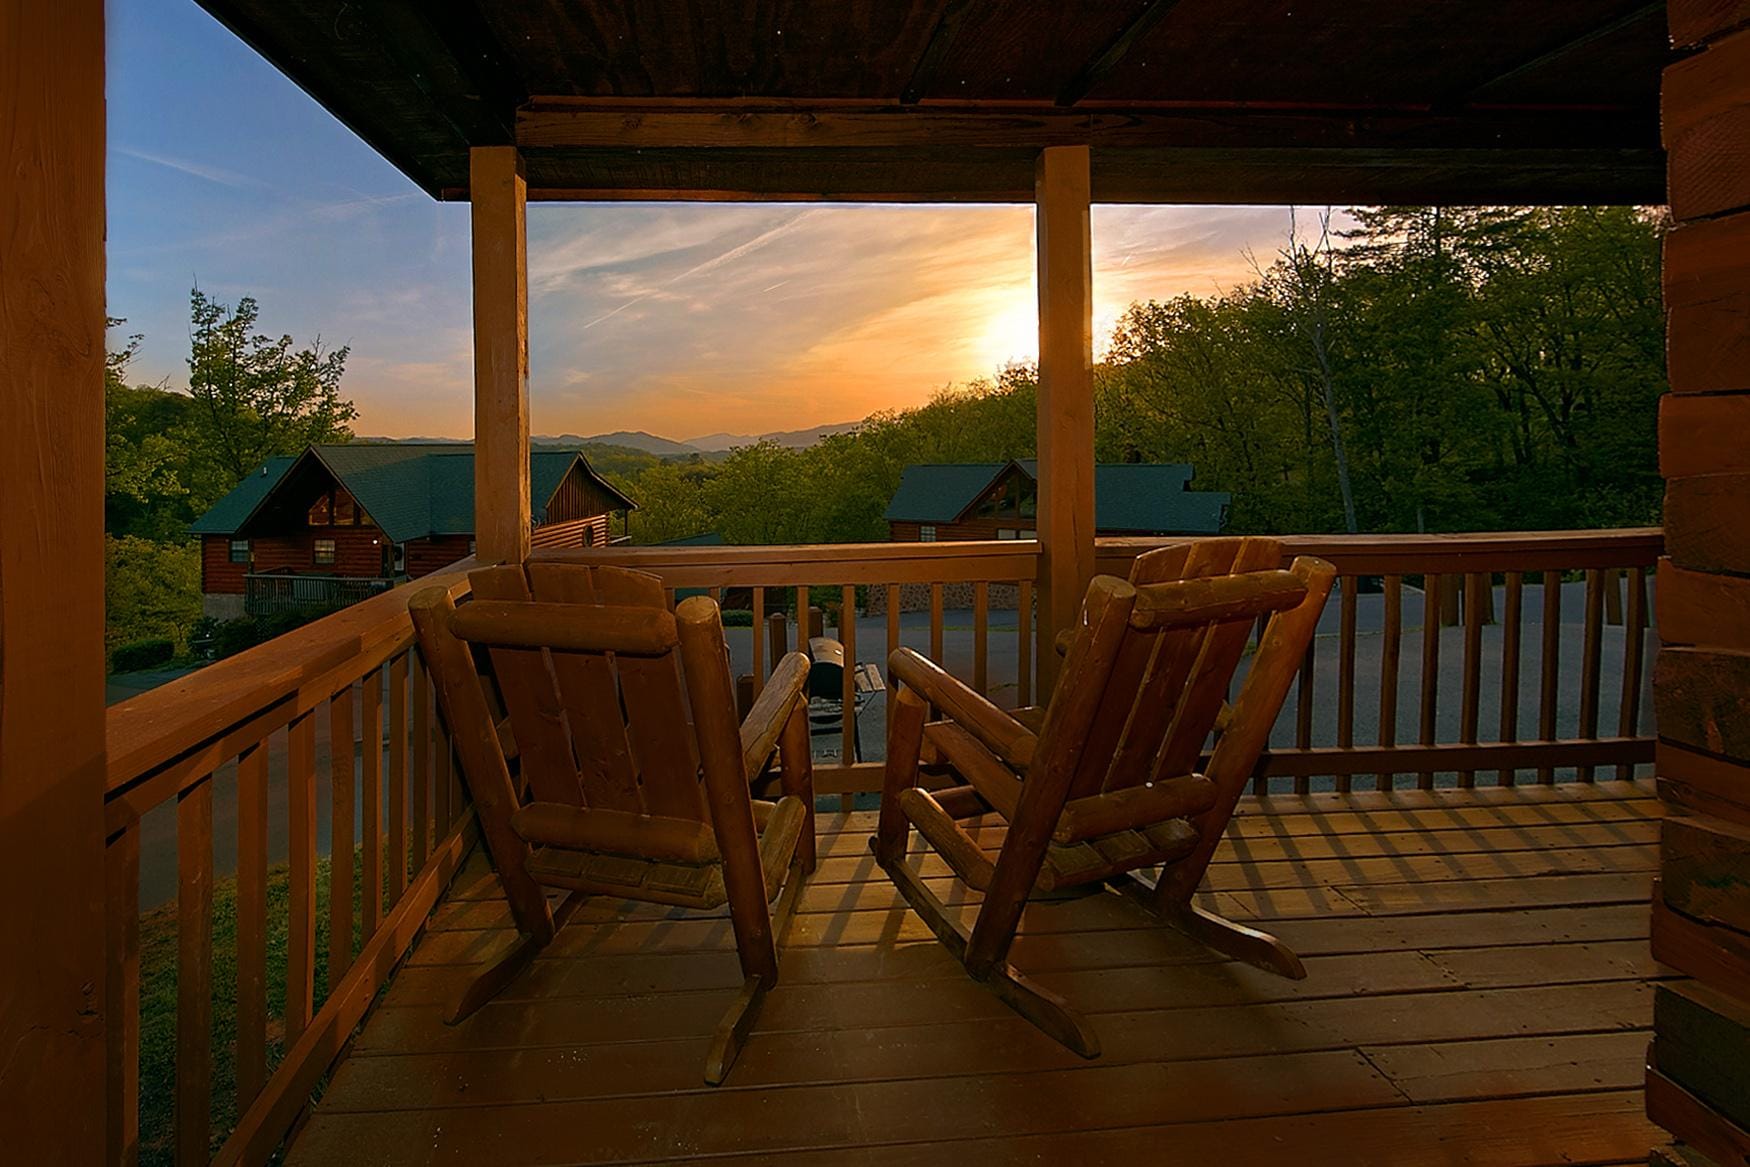 This luxury cabin rental has everything your family or group of friends could ever ask for in a Smoky Mountain Resort Cabin. If you will be visiting Dollywood on your trip, this cabin has easy access to the #1 attraction in Tennessee.